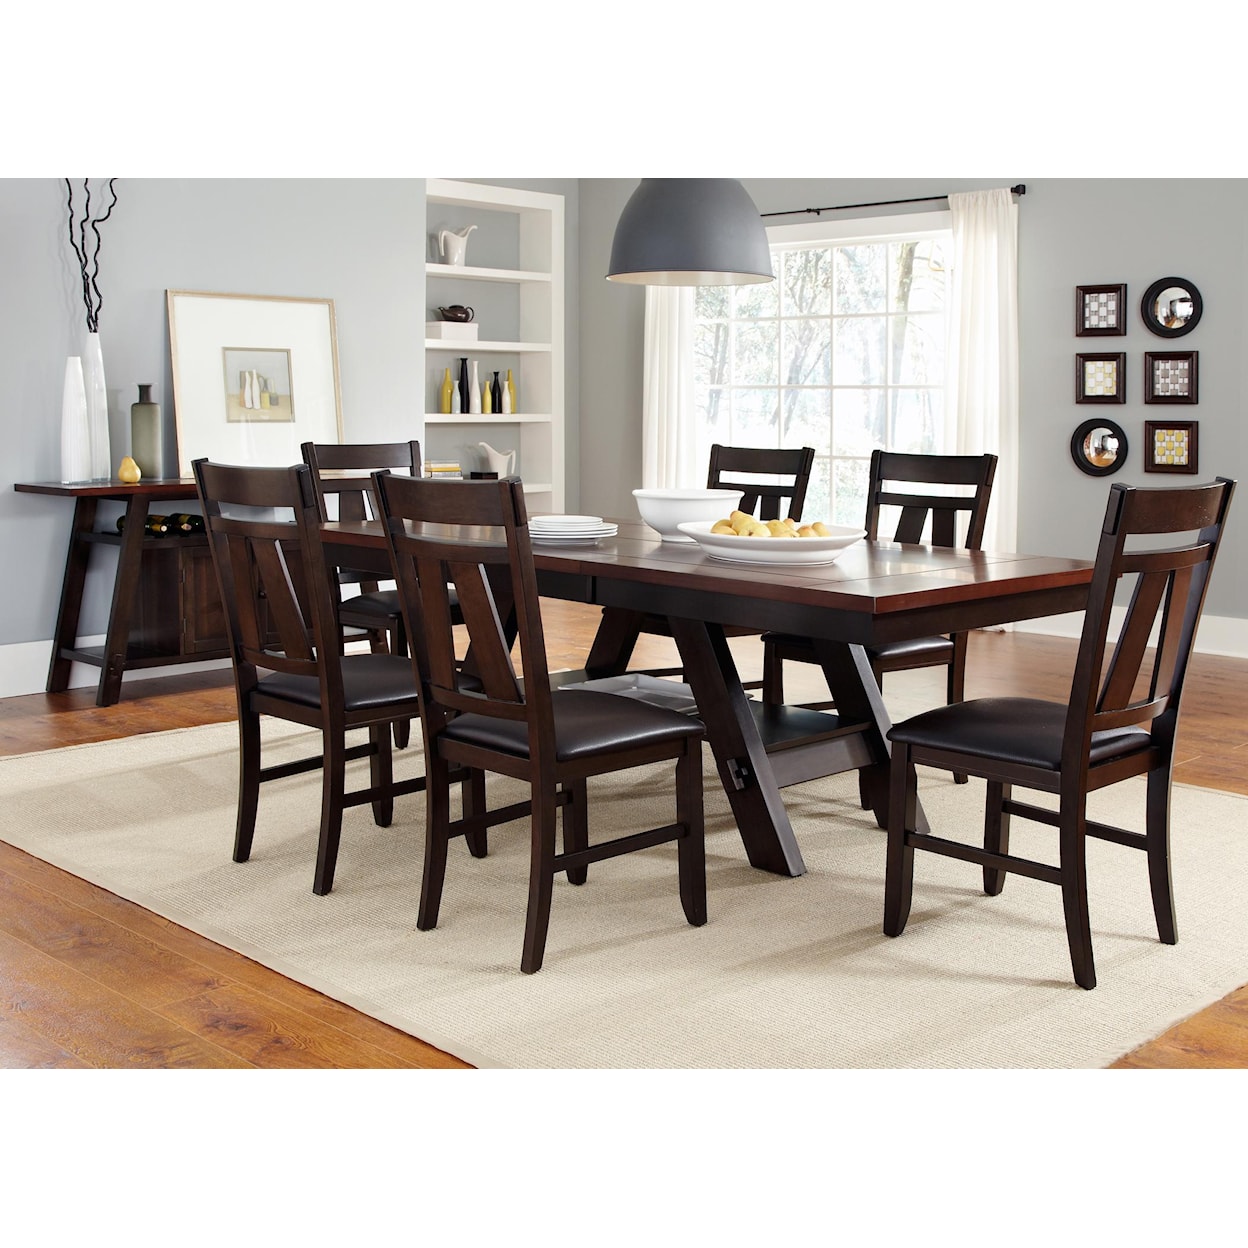 Libby Lawson Formal Dining Room Group